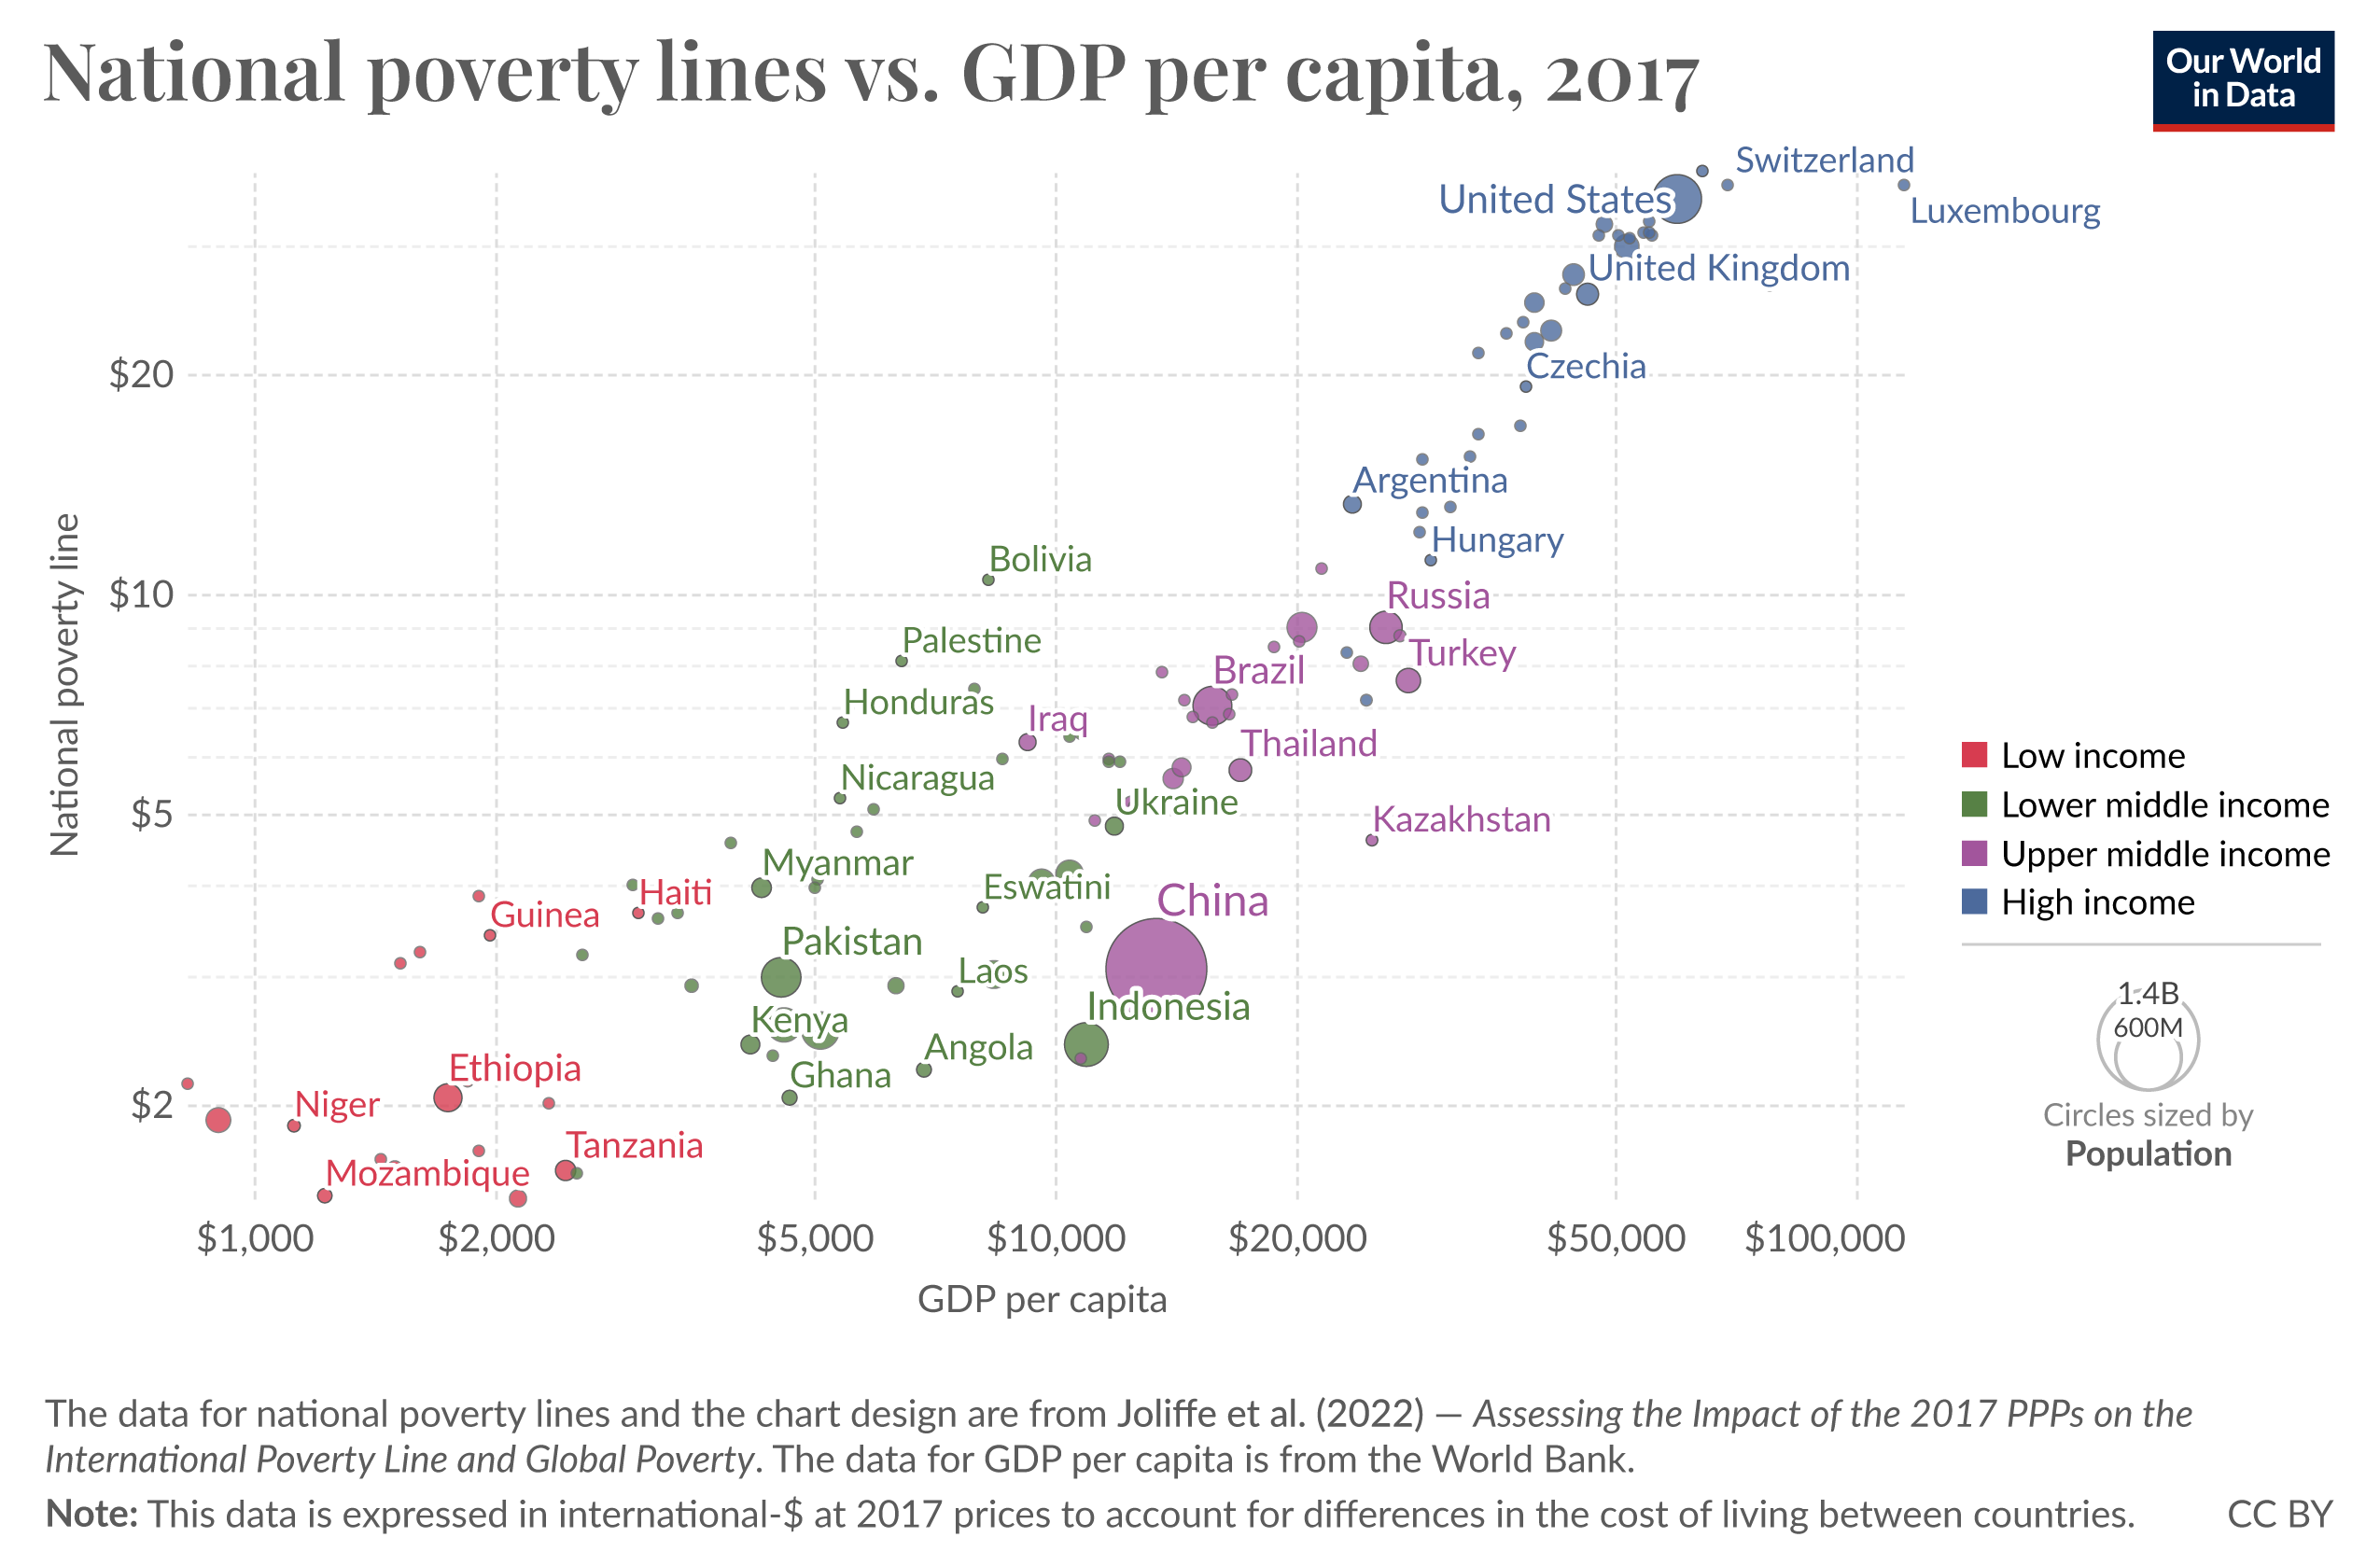 Scatter plot showing national poverty line (y axis) vs. GDP per capita (x axis)